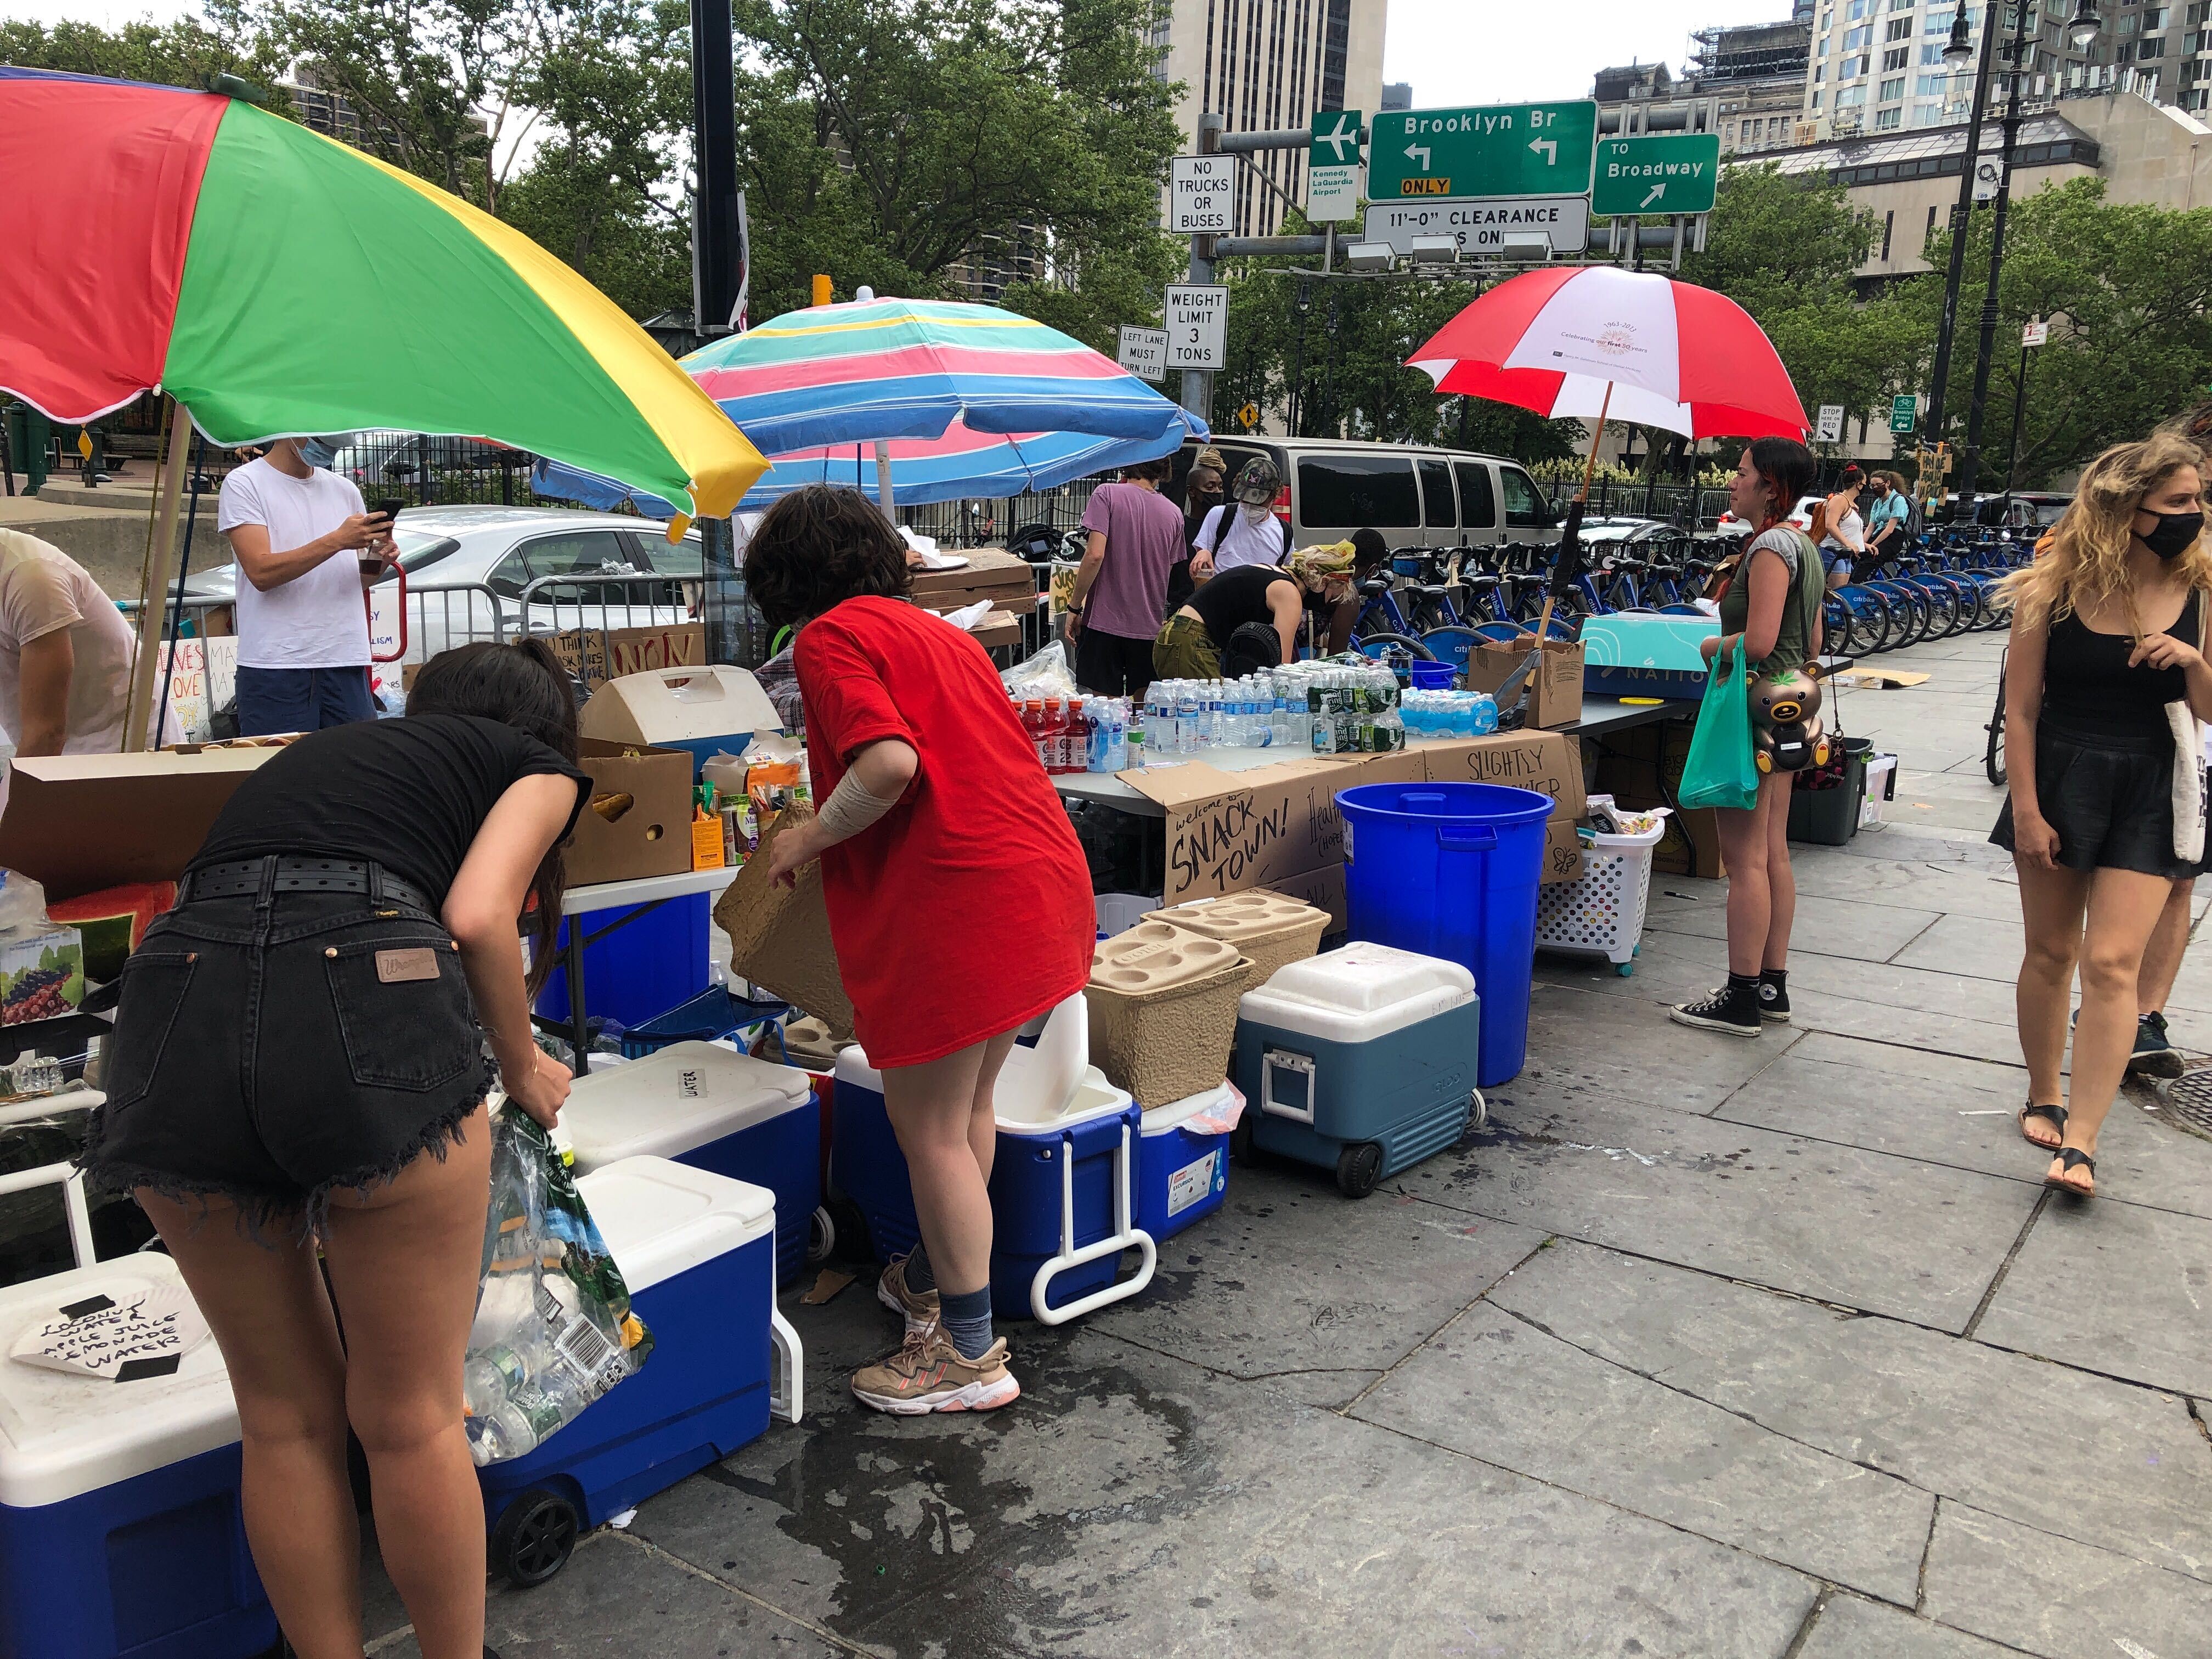 Volunteers distribute food and supplies as activists occupy New York's City Hall Park.